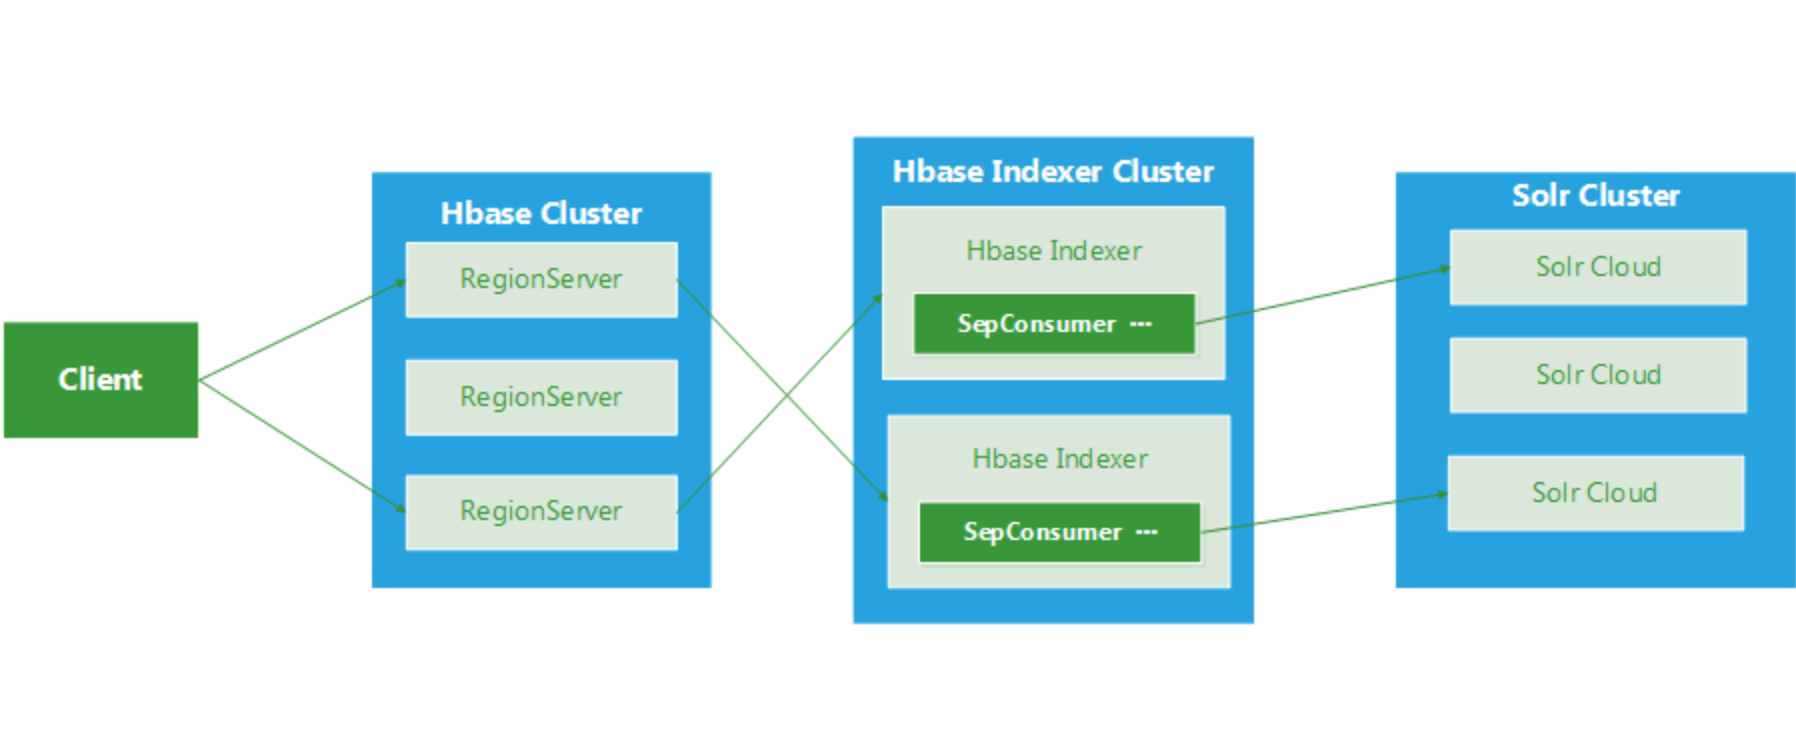 lily-hbase-indexer